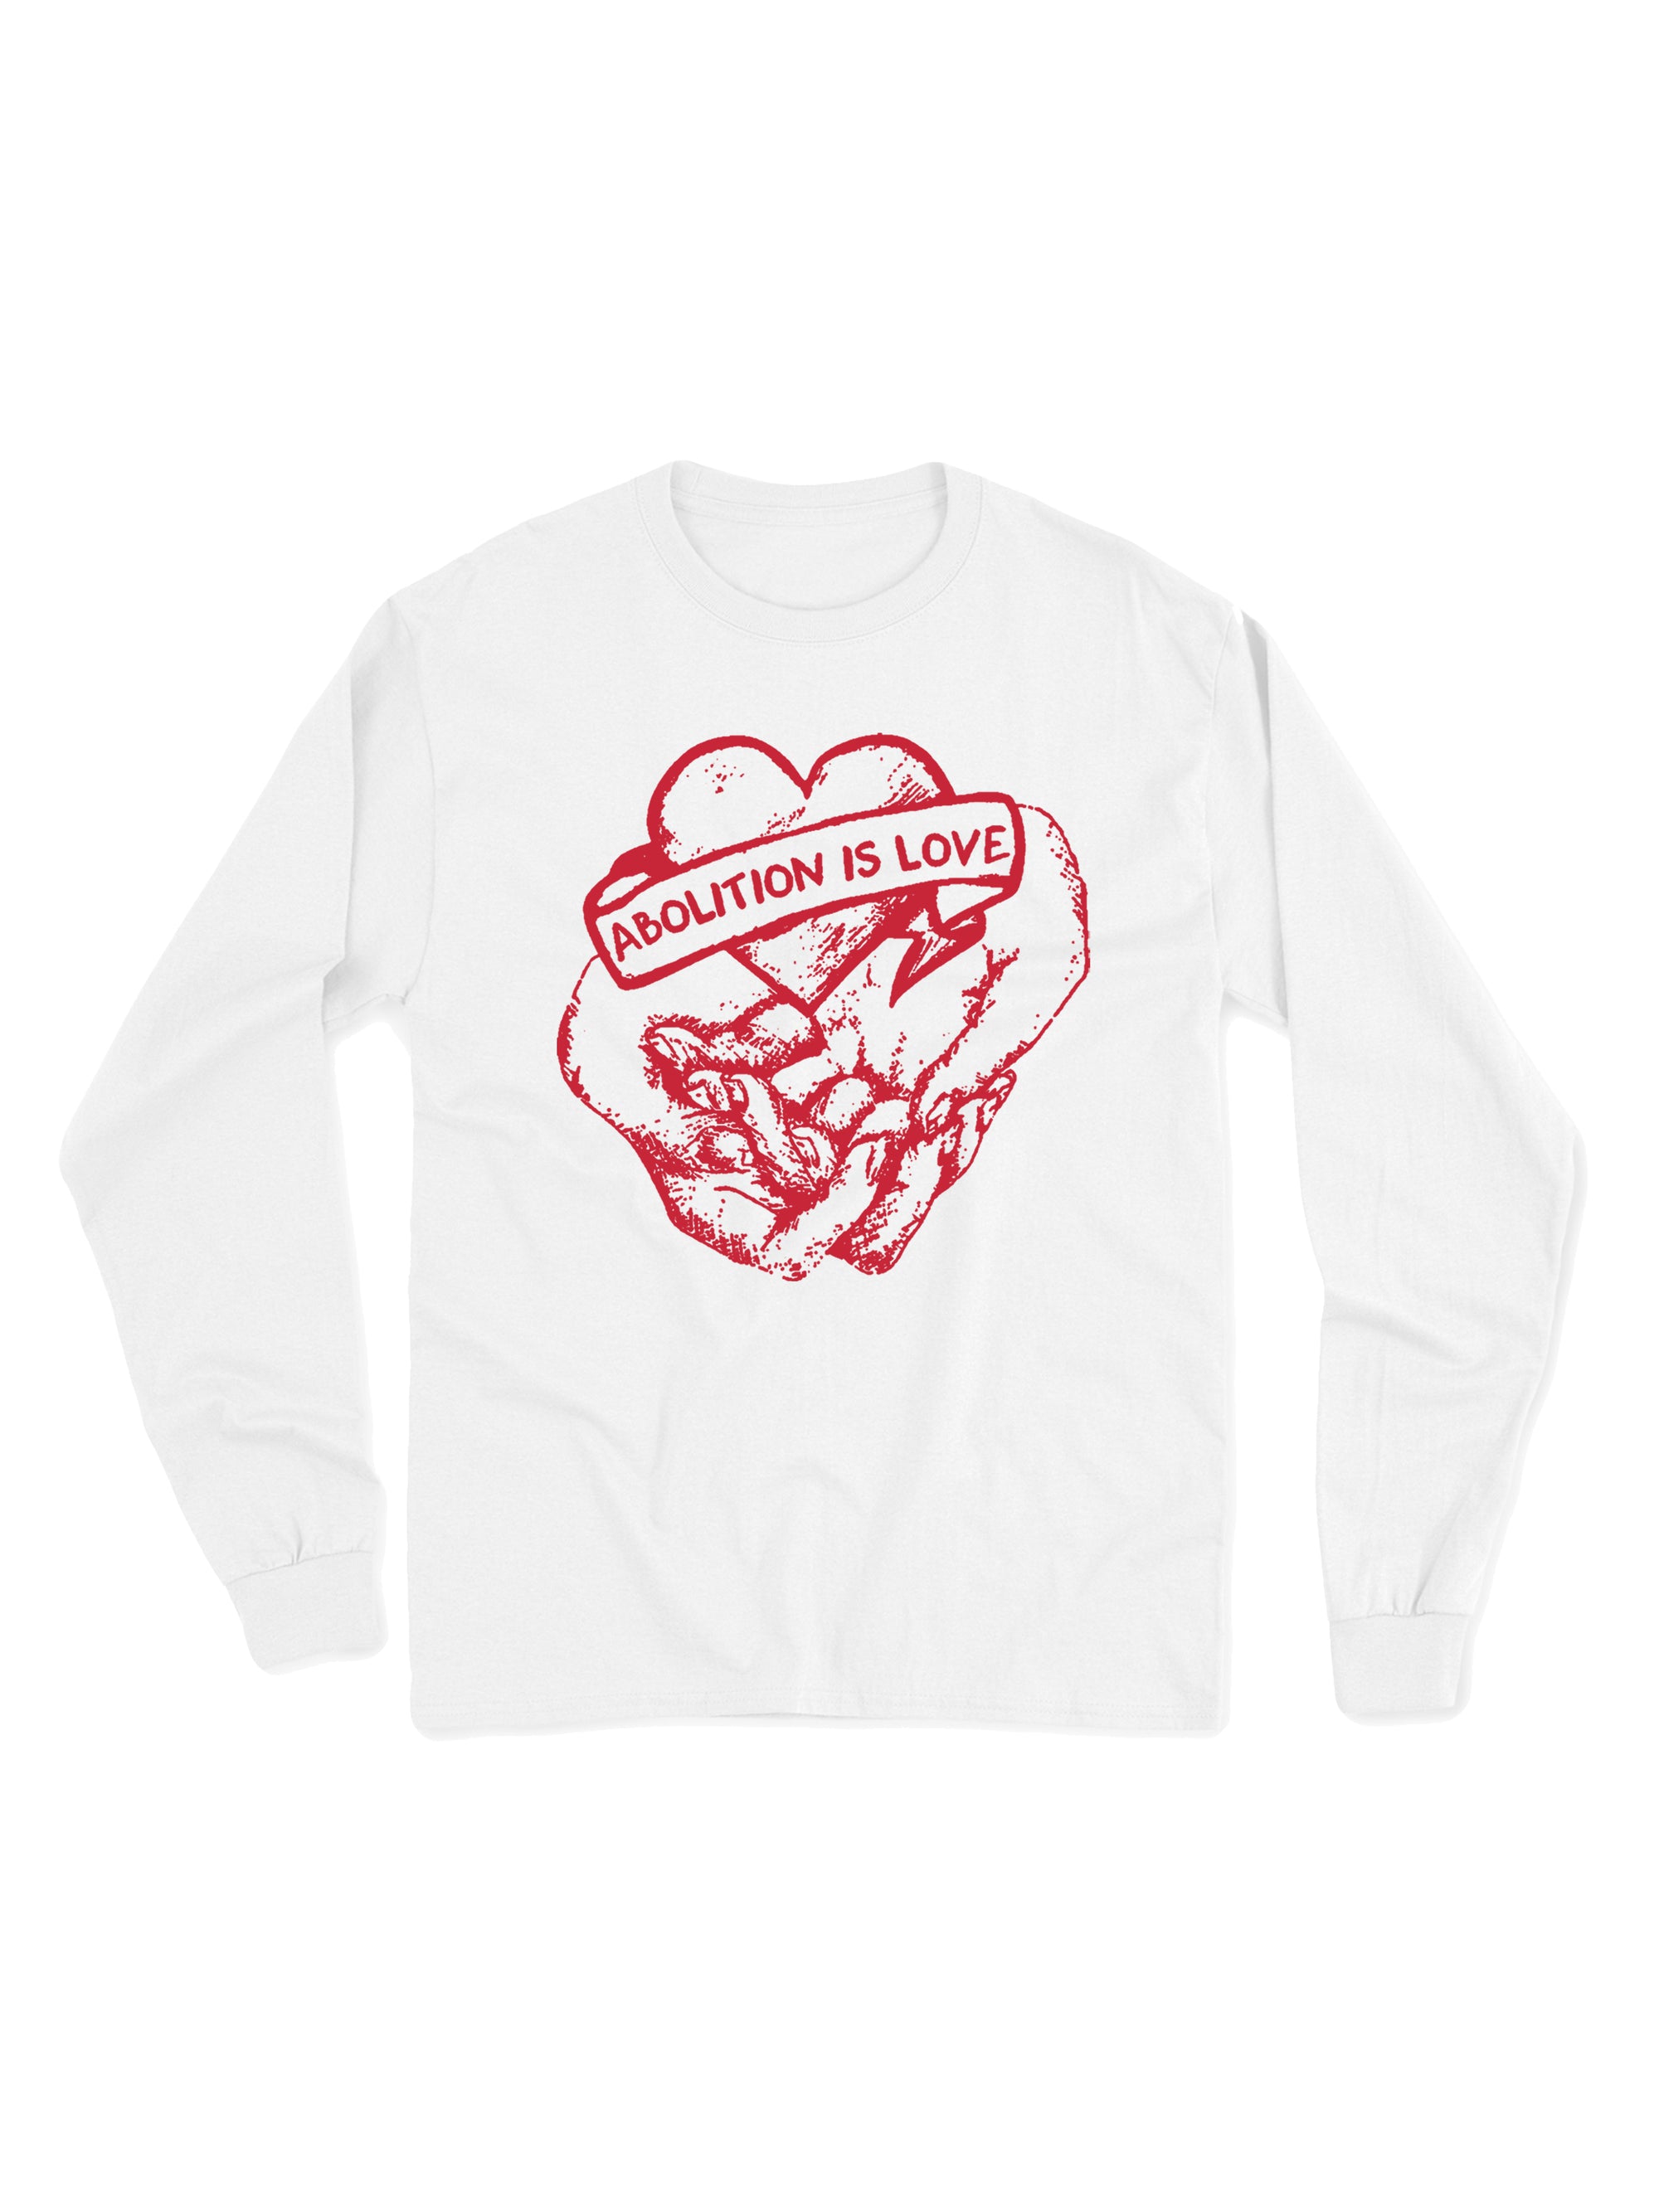 Abolition is Love Long Sleeve Tee